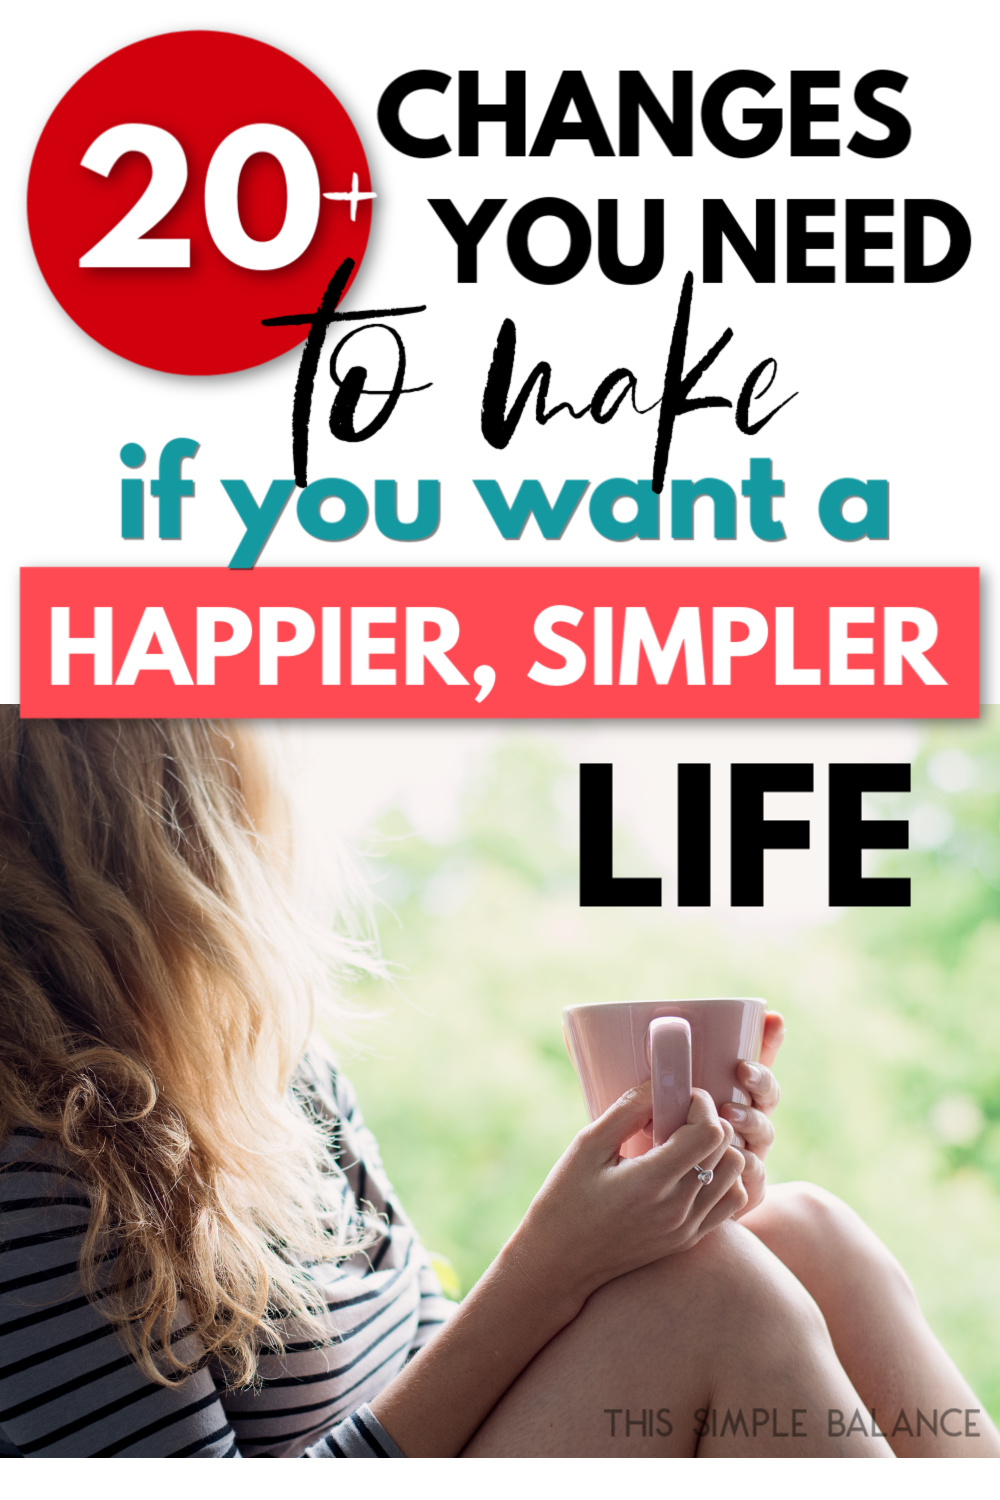 woman living a simplified life, sipping coffee from a pink mug, with text overlay, "20+ changes you need to make if you want a happier, simpler life"